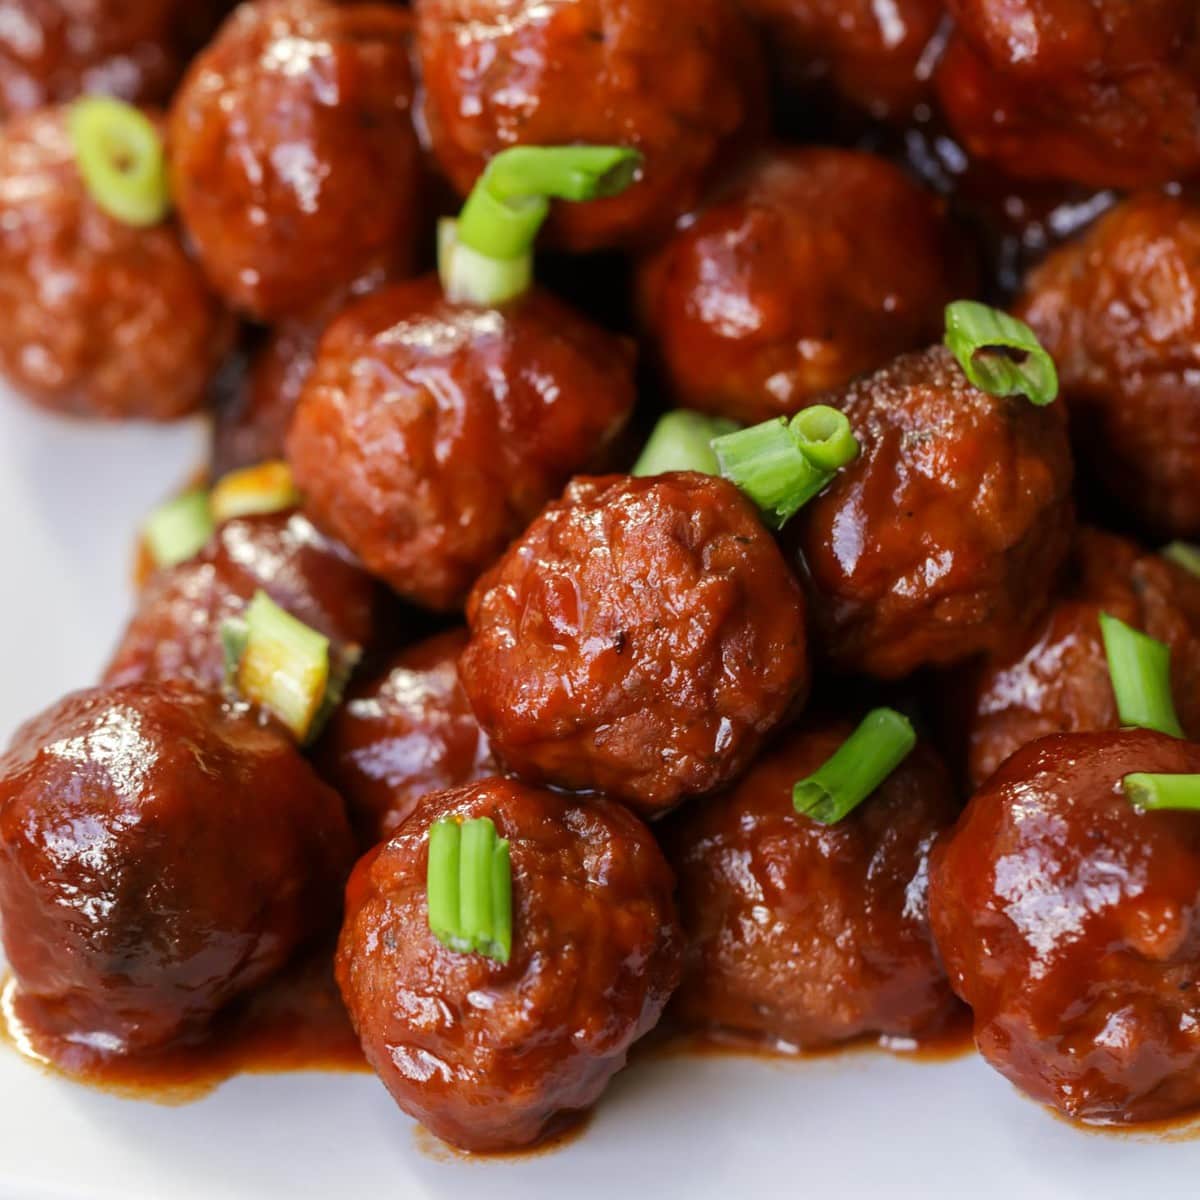 Halloween appetizers - plate piled with grape jelly meatballs.